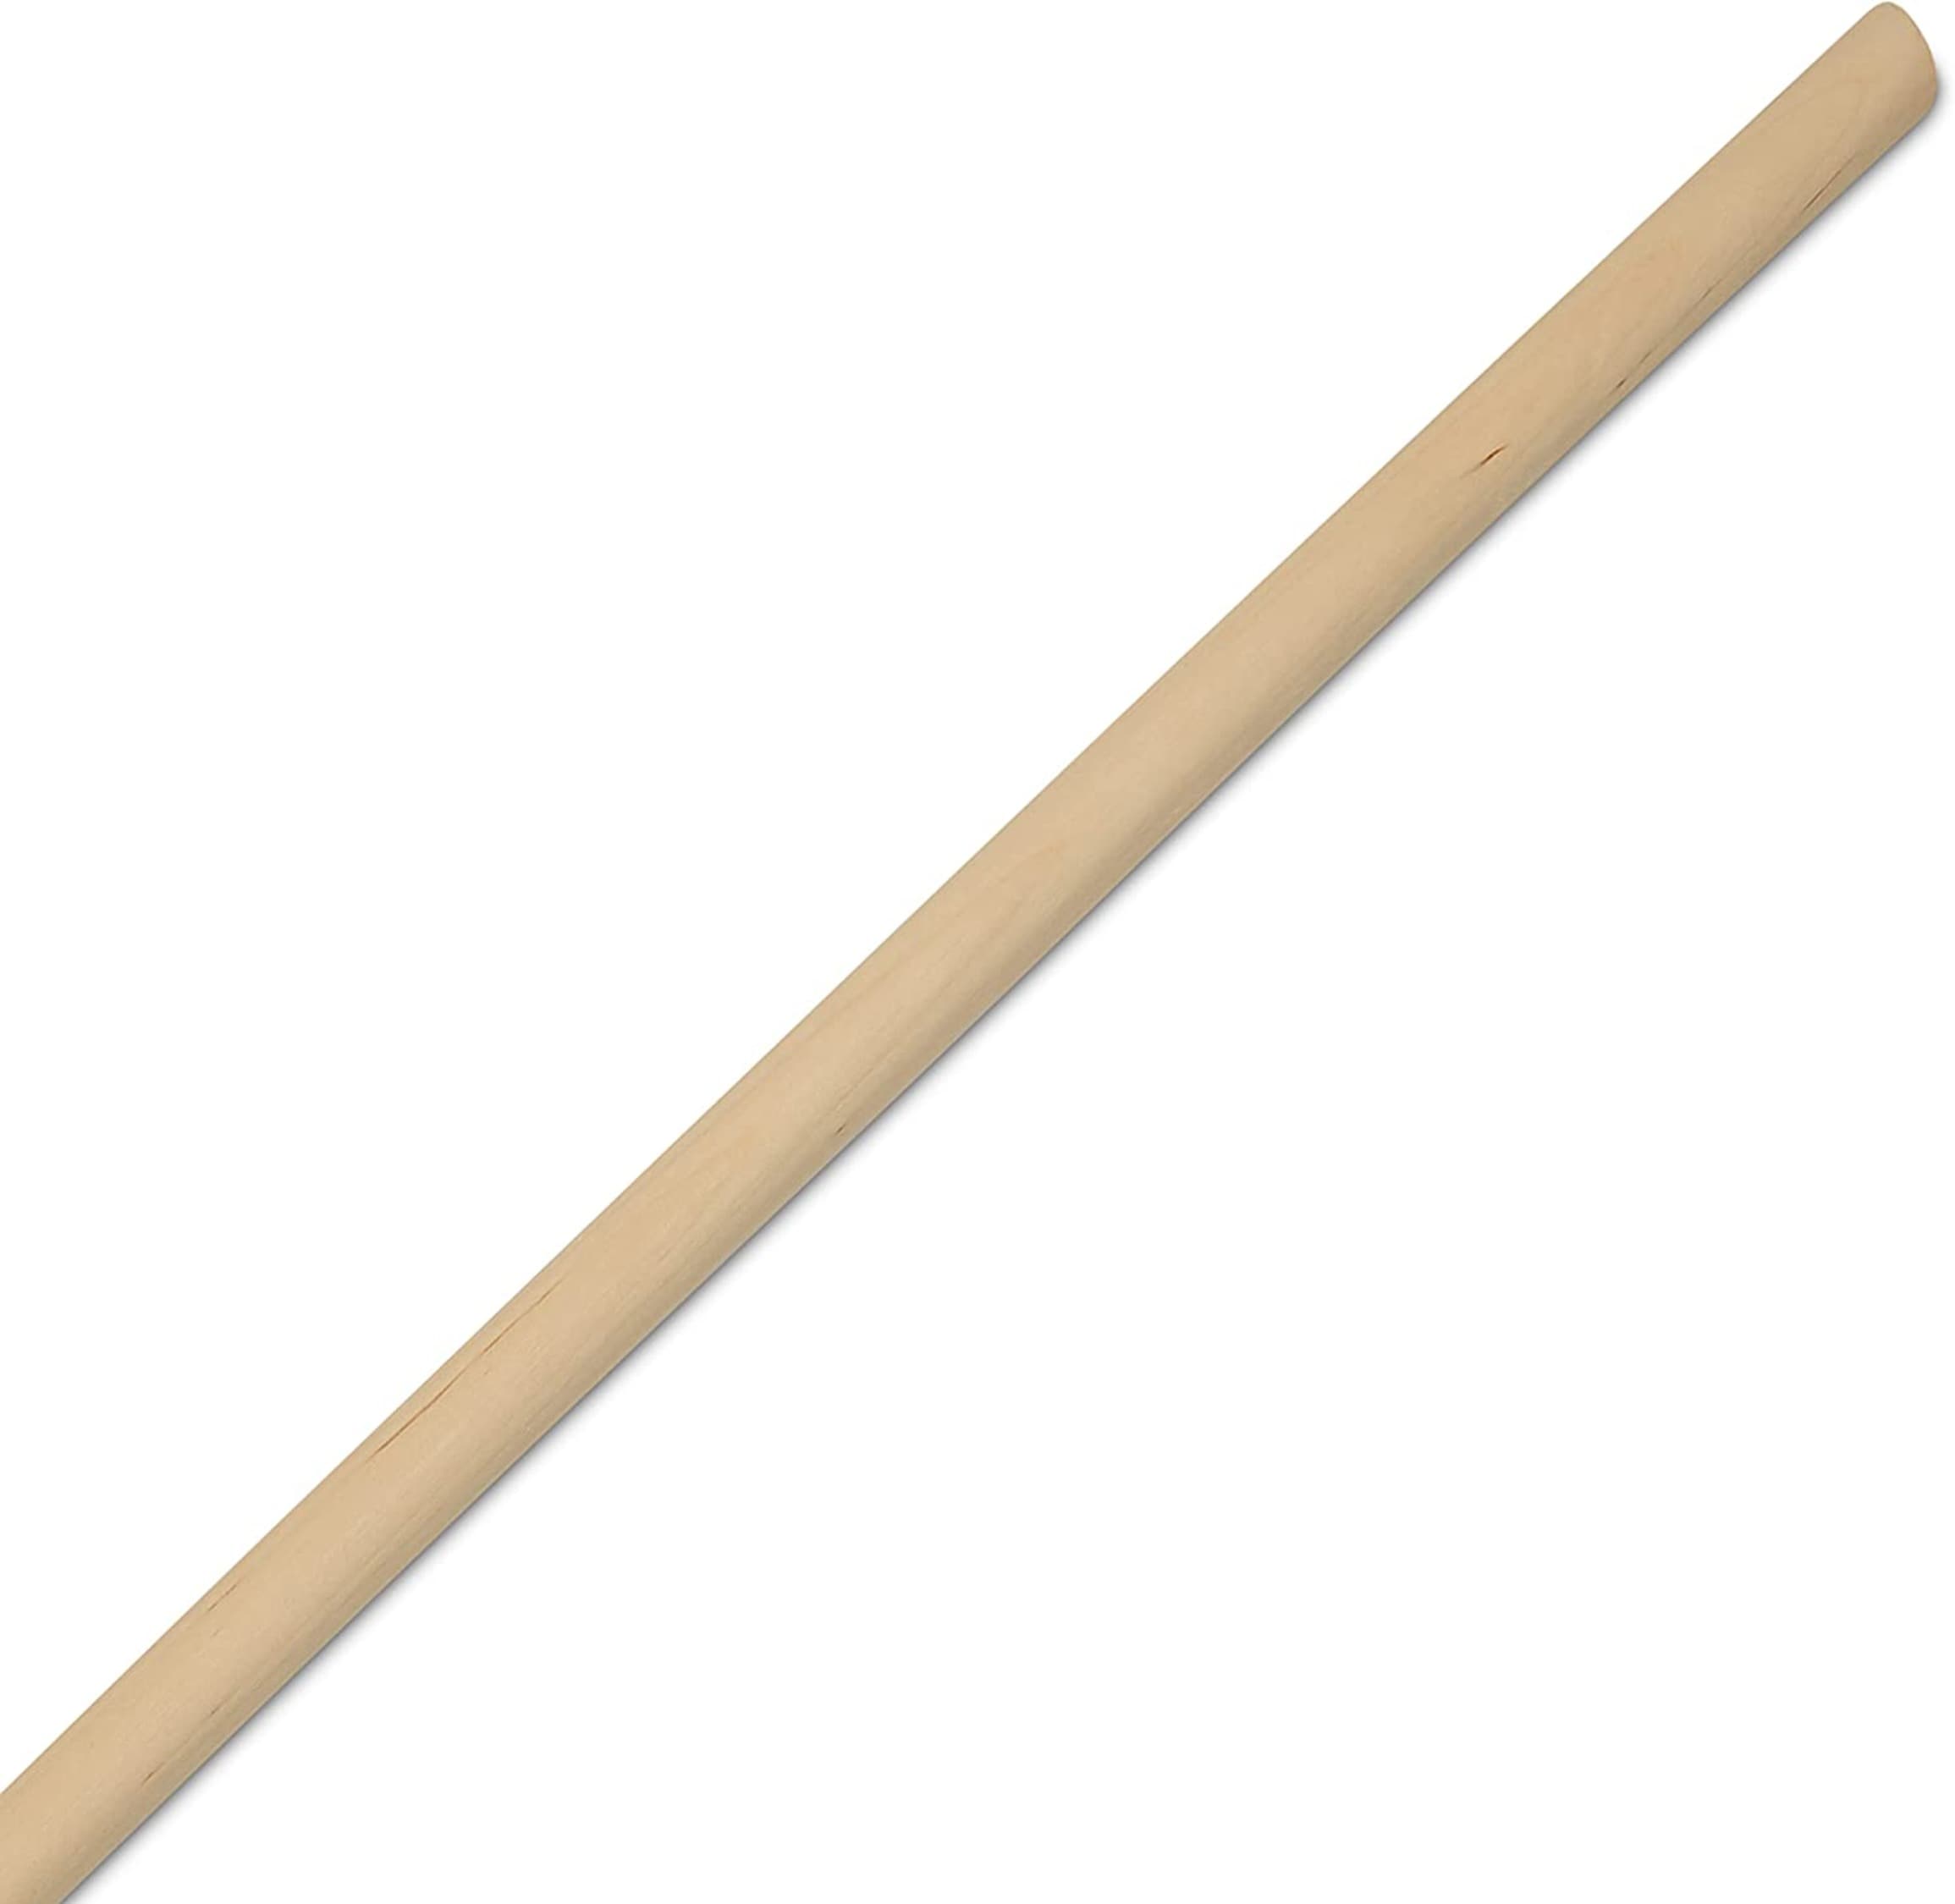 Dowel Rods Wood Sticks 3/16 inch x 12 Inches 500 Pieces Woodpeckers Wooden Dowel